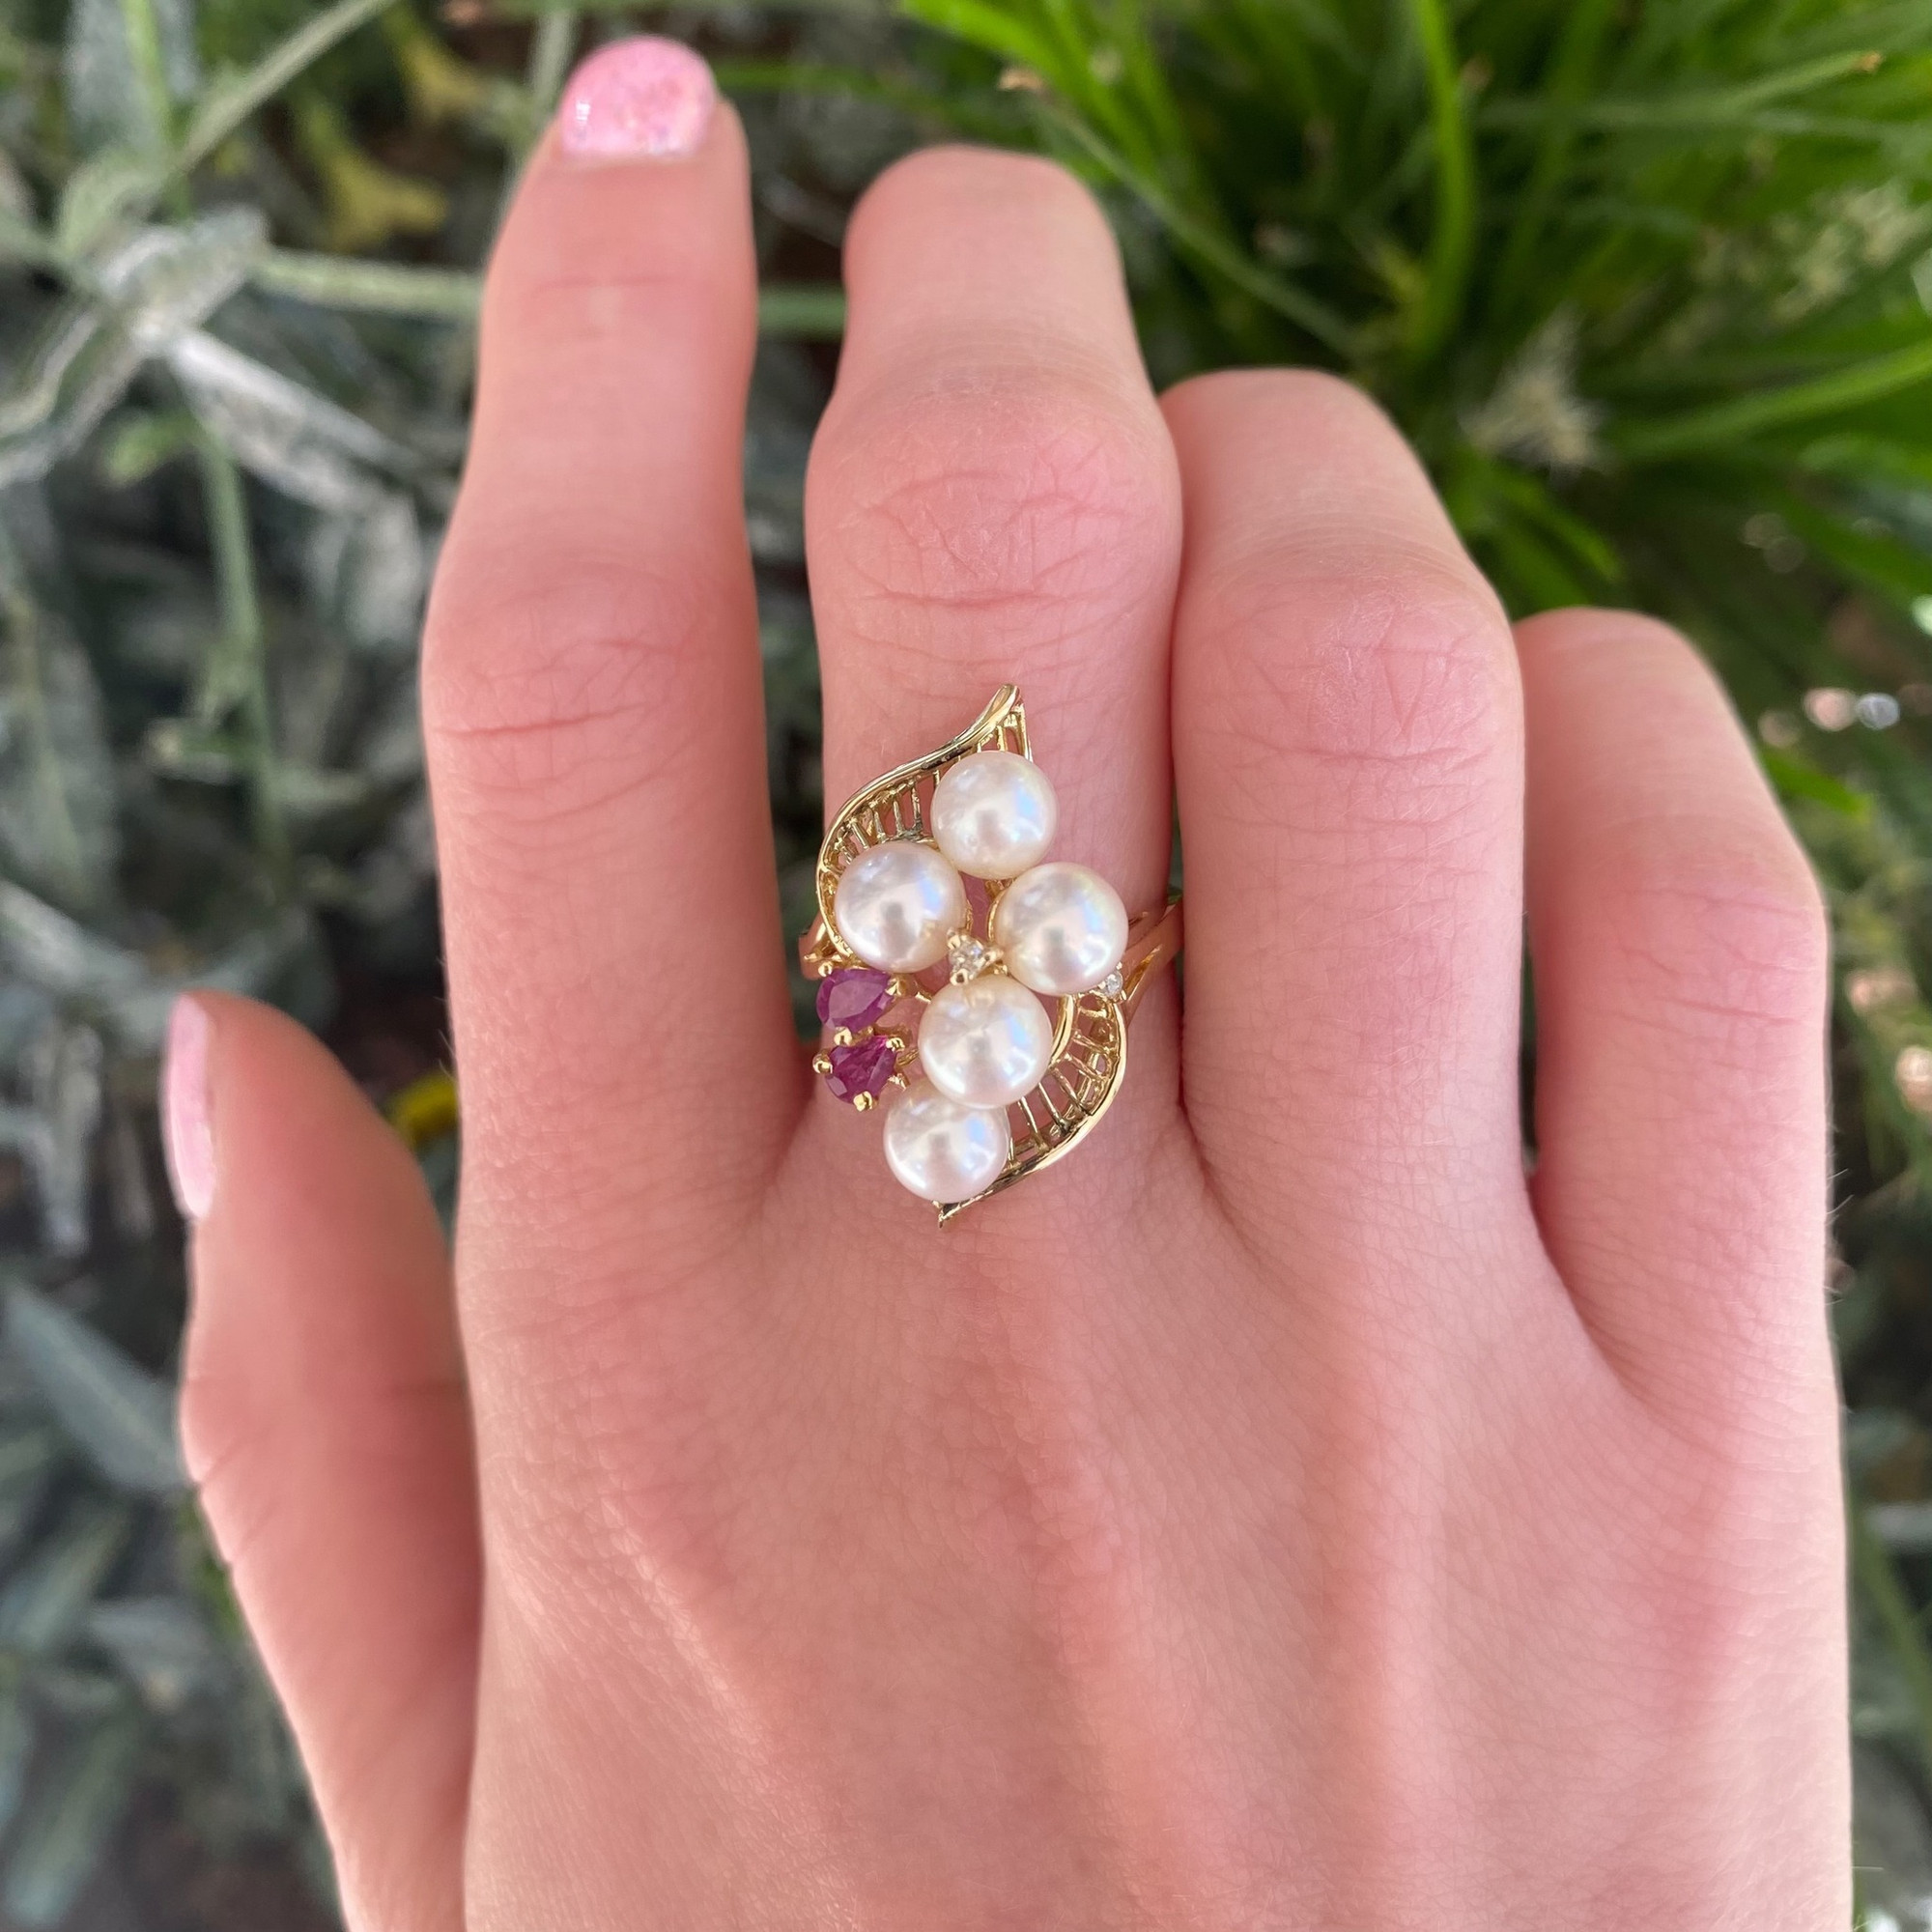 1980s Vintage 14K Gold, Diamond, and Pearl Filigree Ring